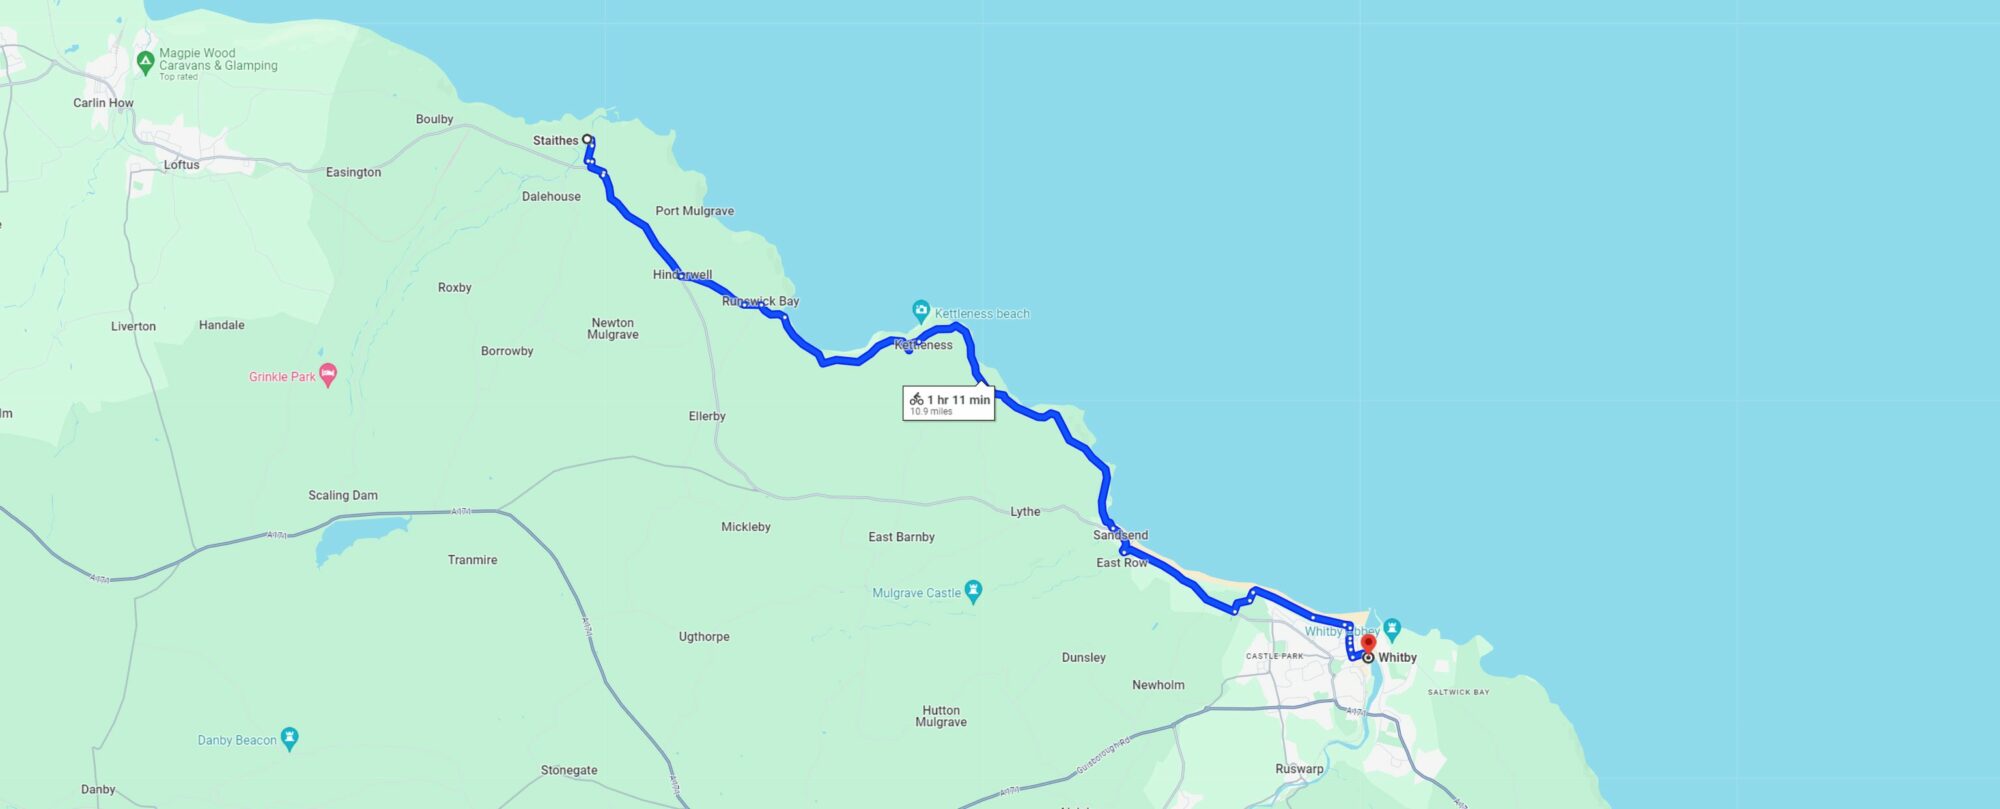 Staithes to Whitby map and routes